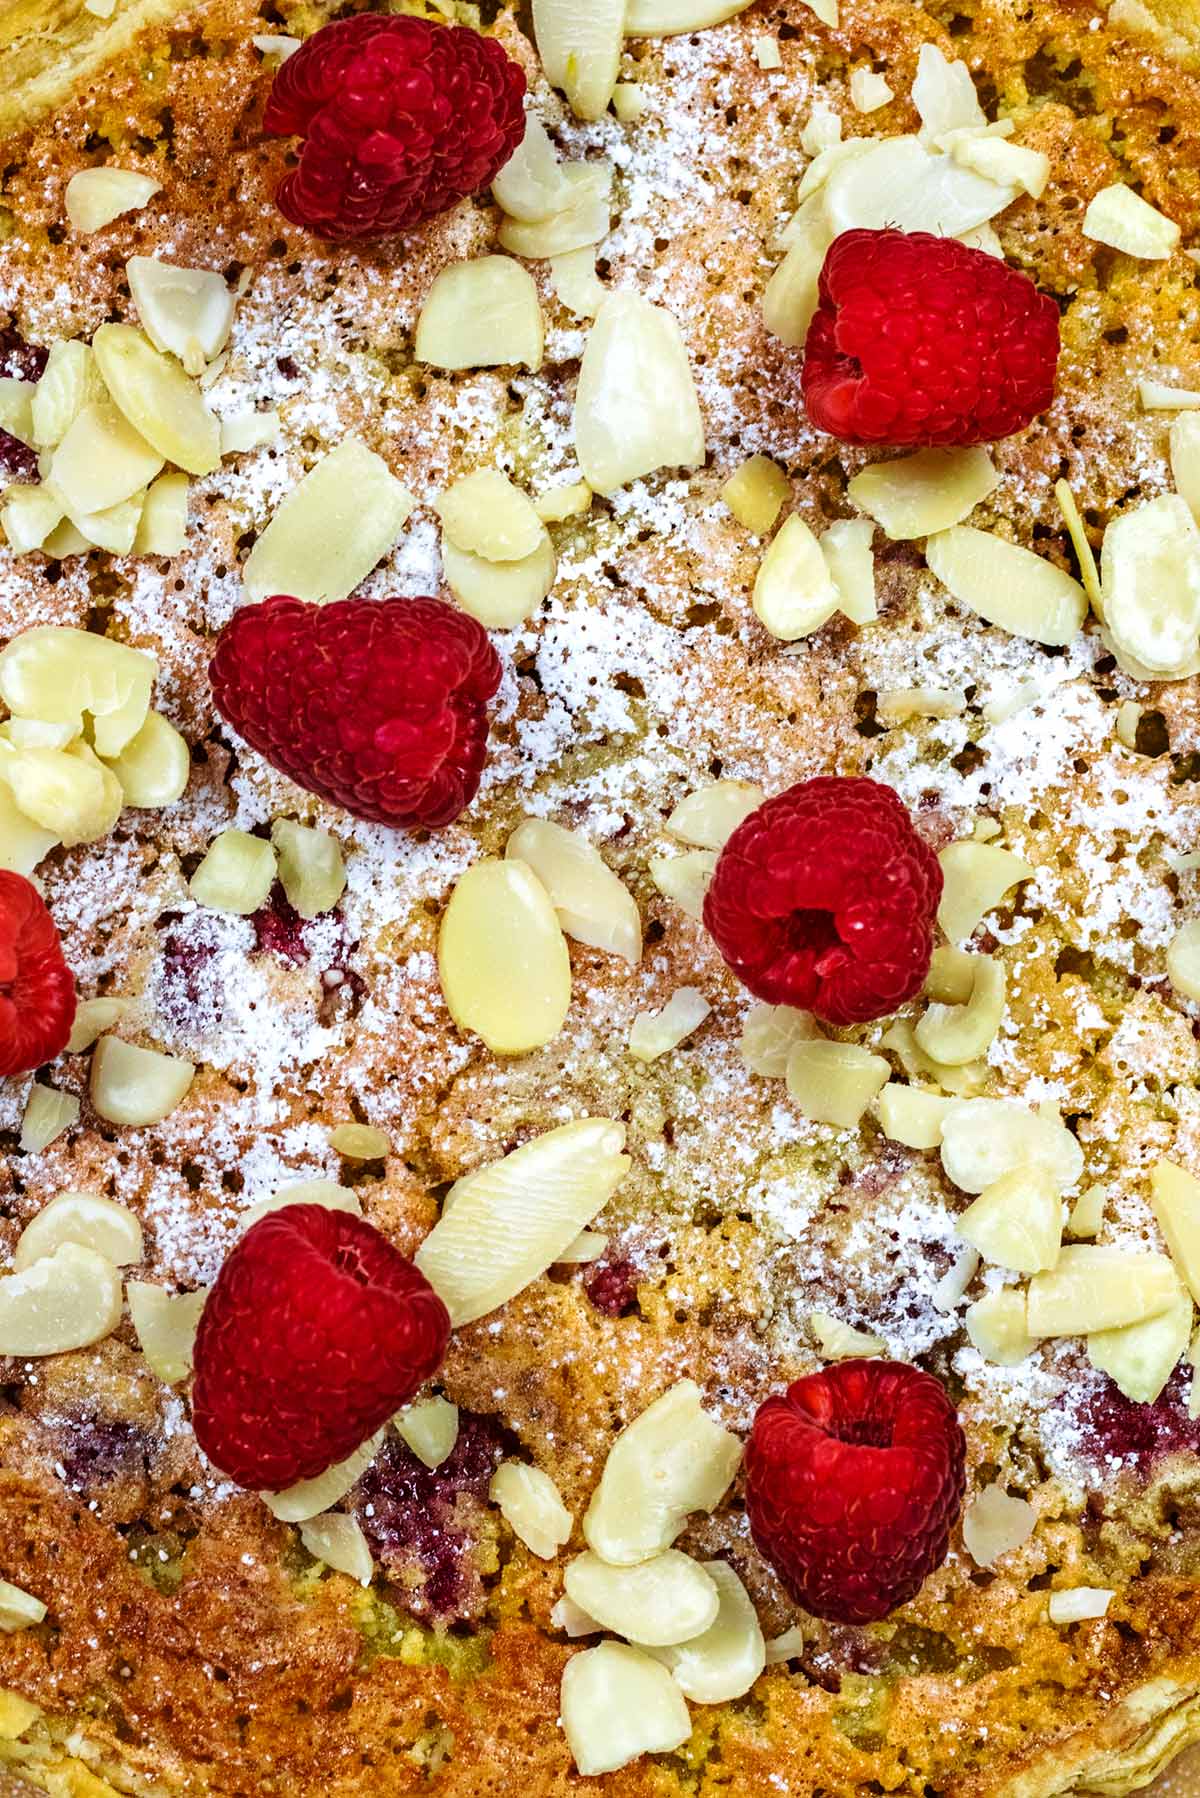 Six raspberries and some flaked almonds on a icing sugar dusted Bakewell pudding.